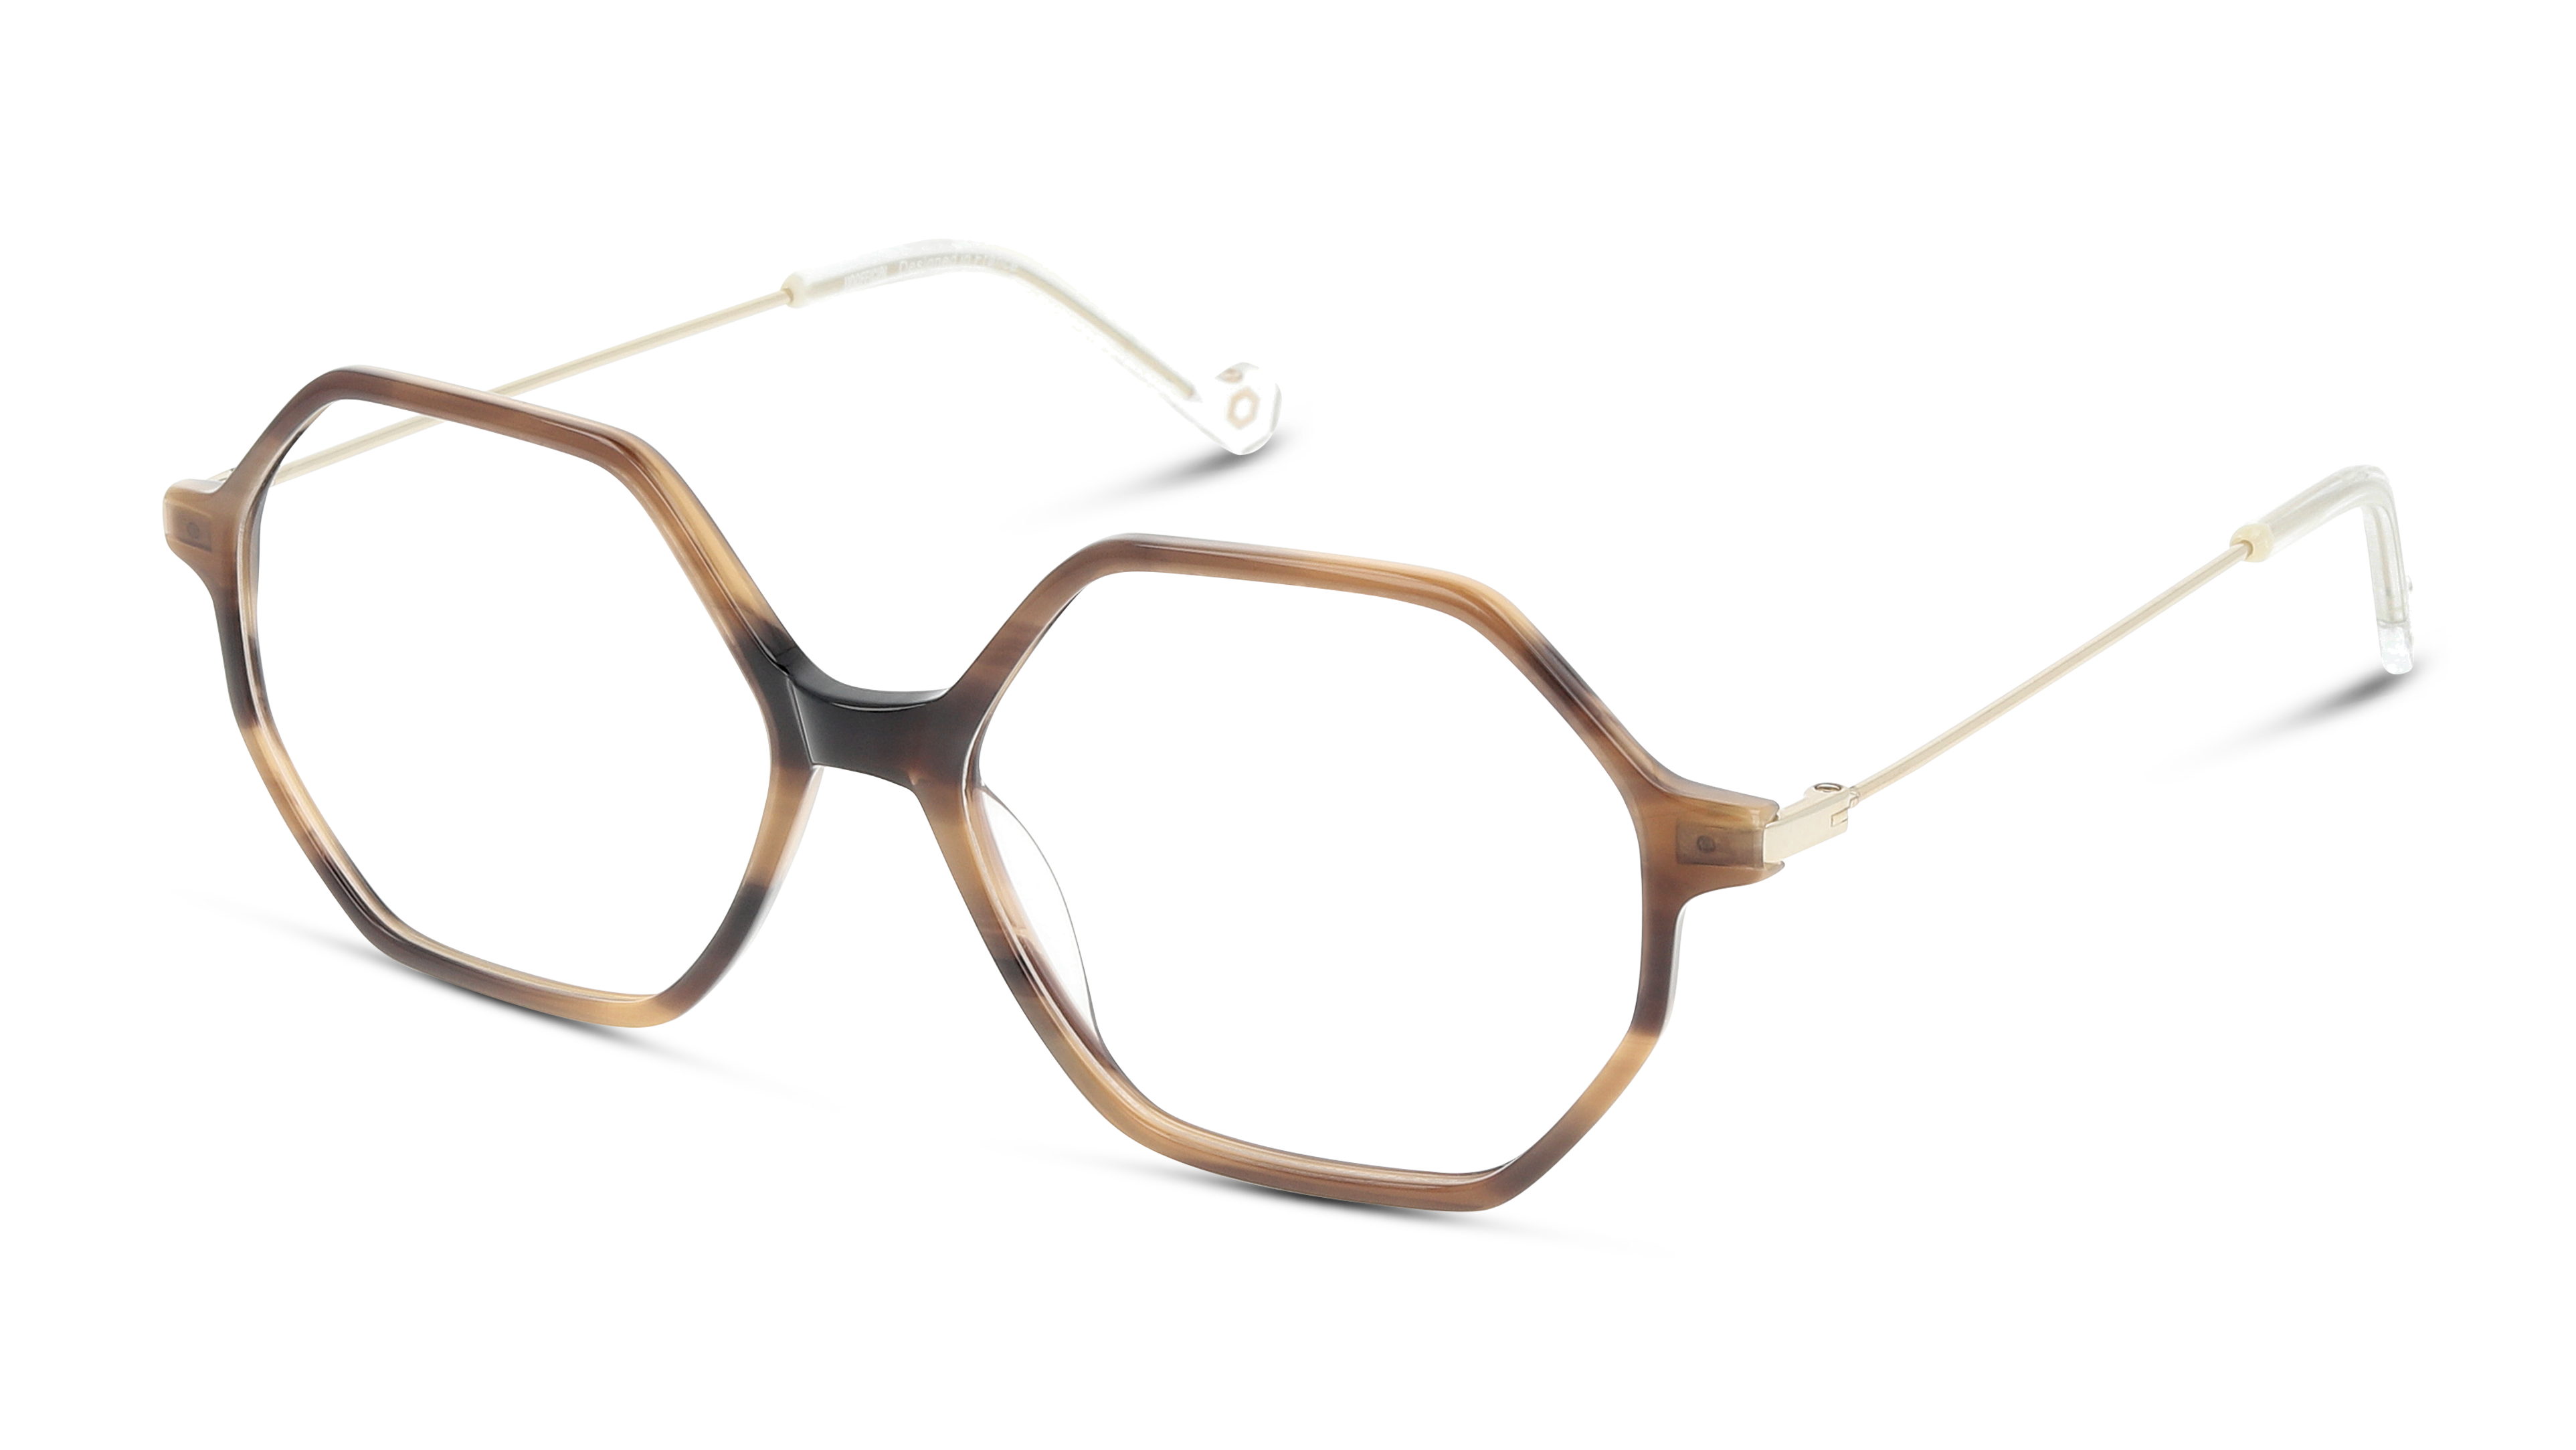 Angle_Left01 Unofficial UNOF0187 (ND00) Glasses Transparent / Brown